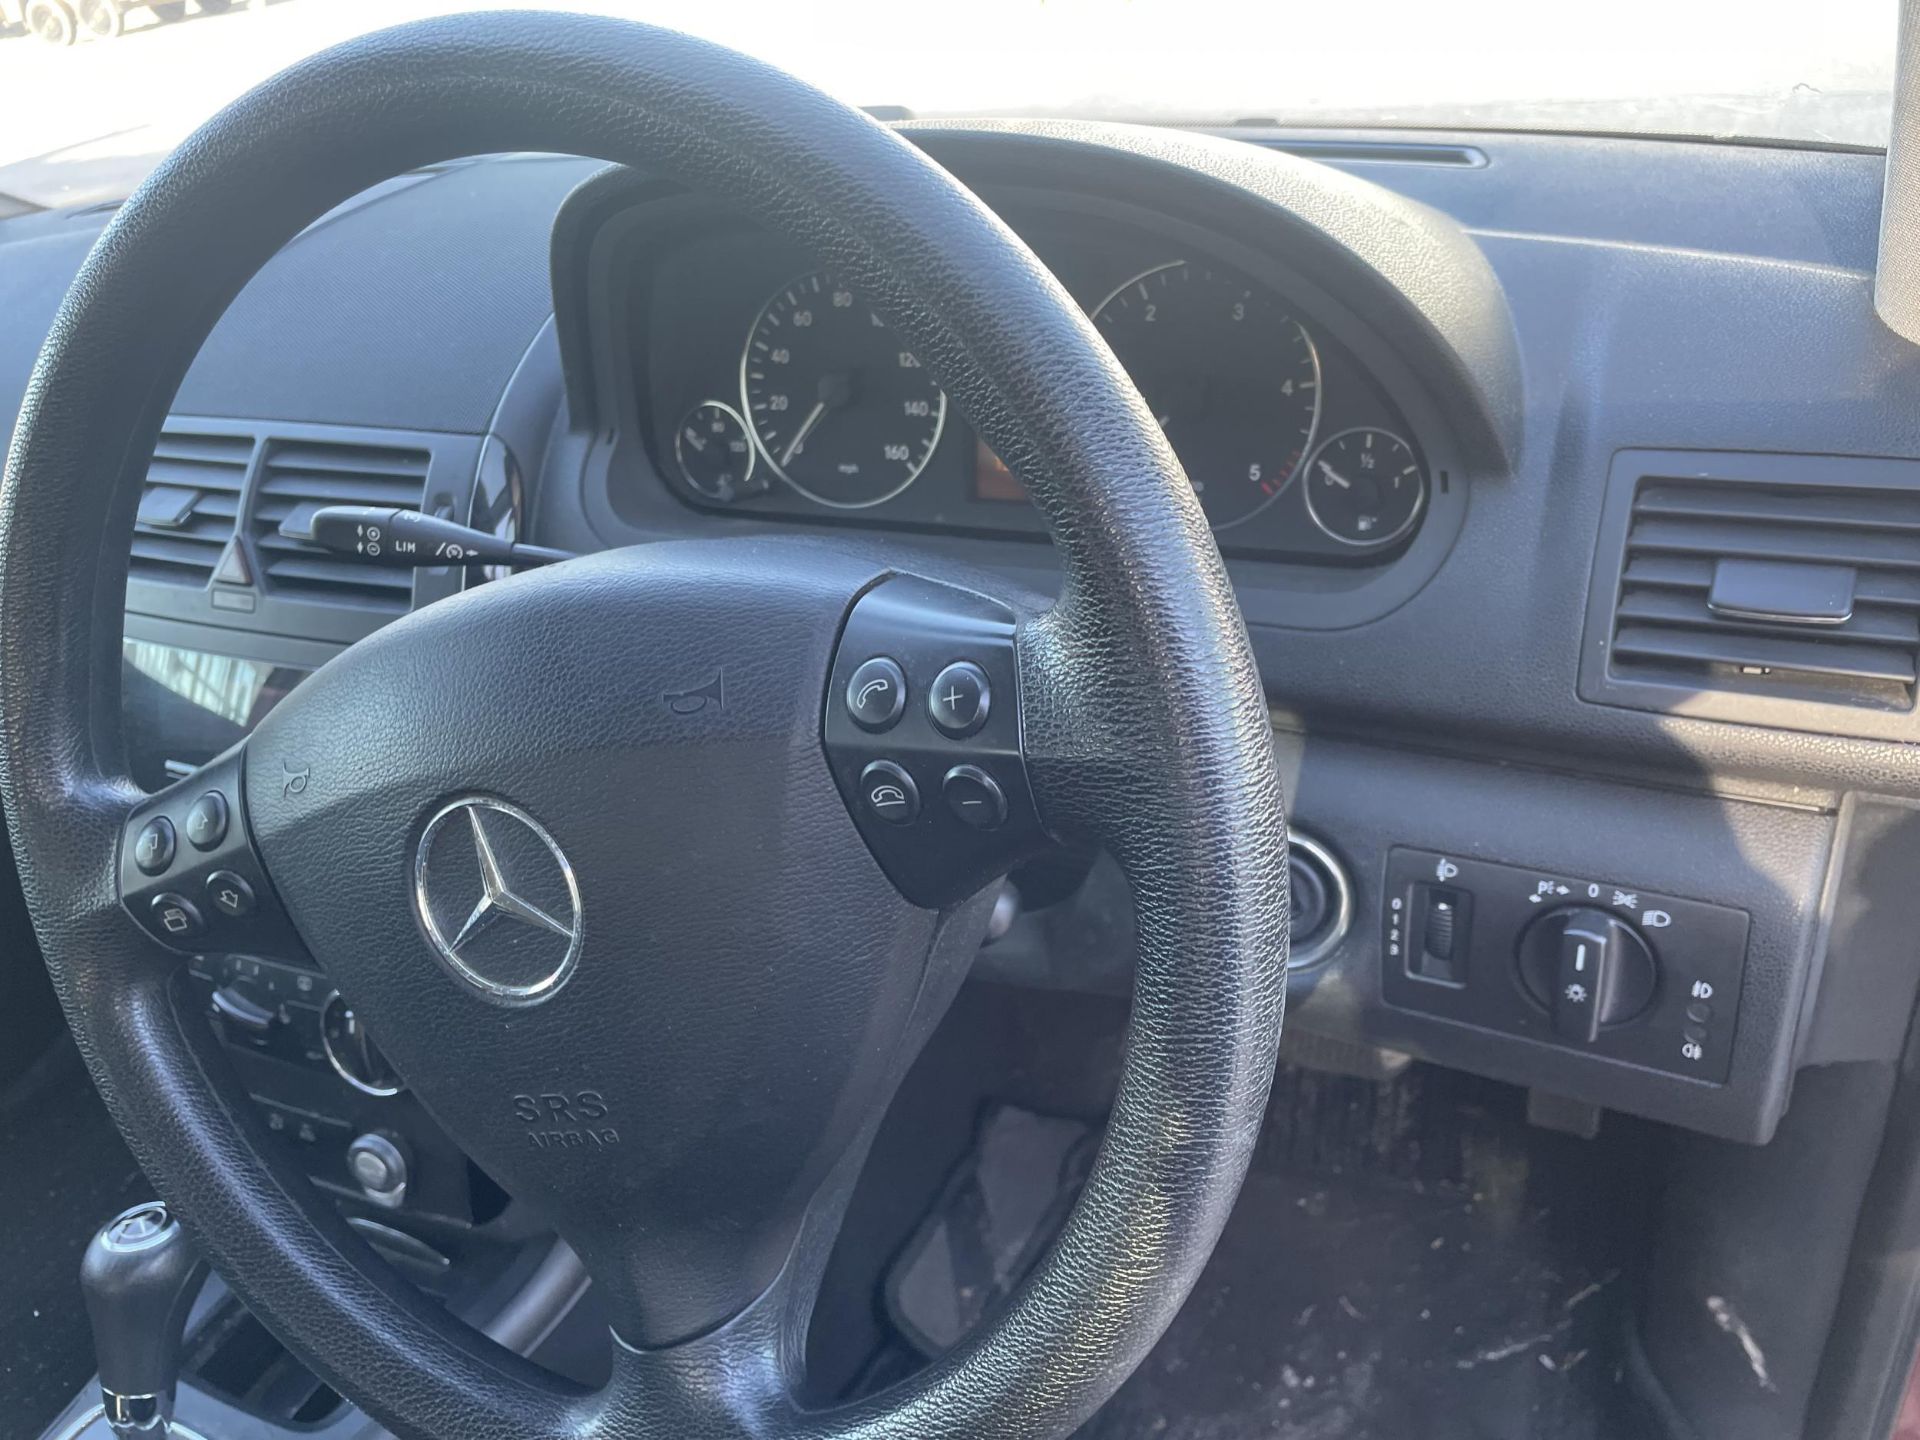 A 2006 MERCEDES A180 CDI CLASSIC FIVE DOOR DIESEL HATCHBACK CAR, AUTOMATIC TRANSMISSION, 103908 - Image 10 of 19